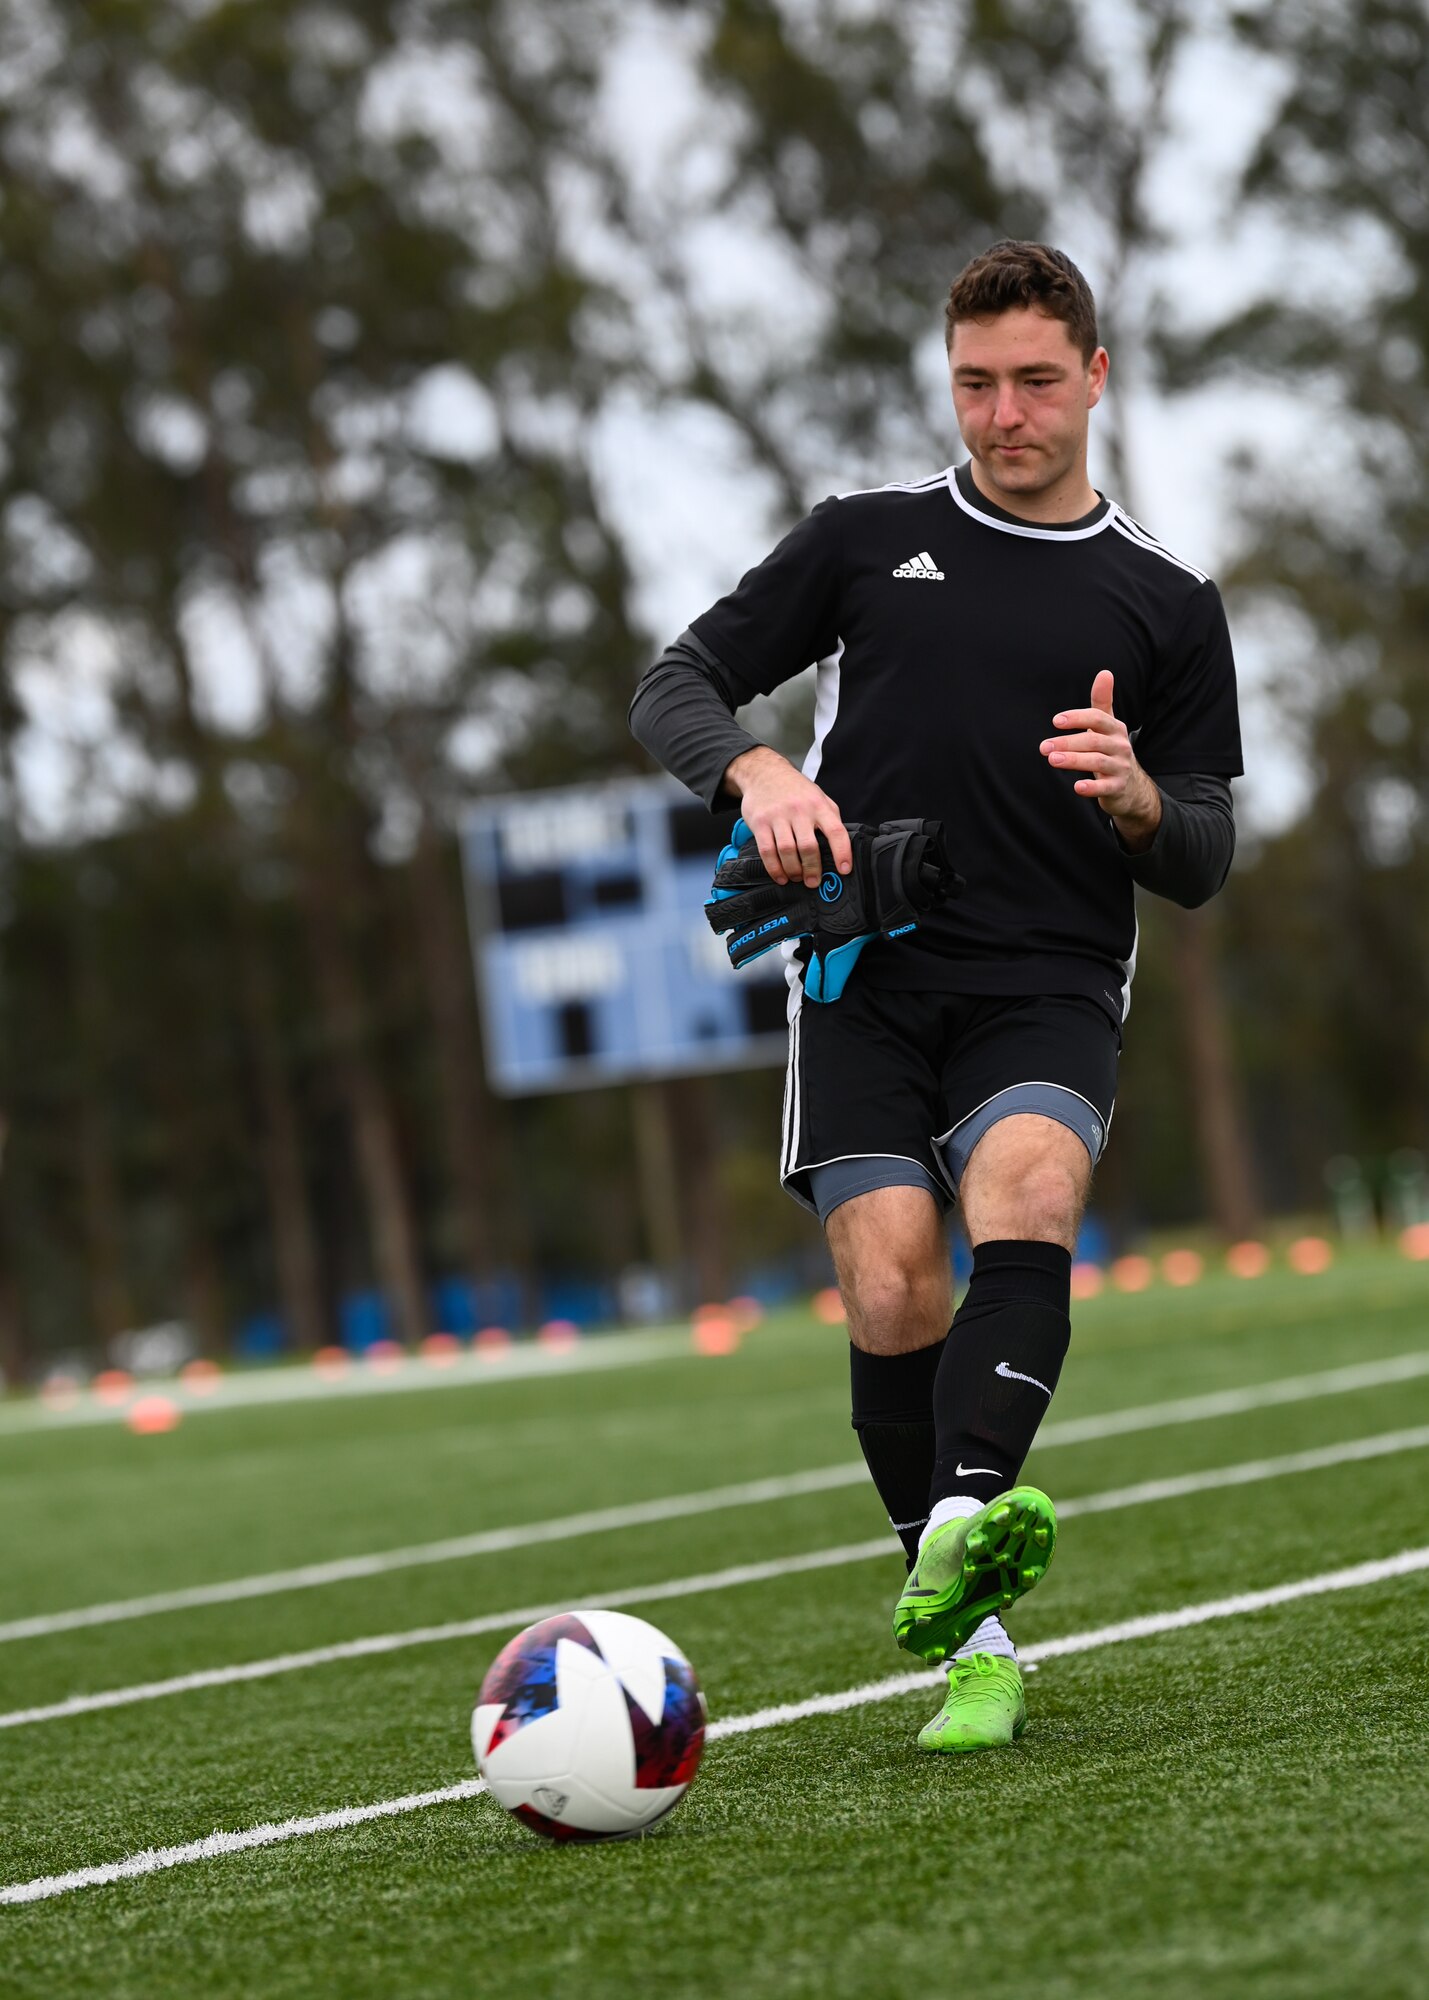 The Department of the Air Force’s Men’s Soccer Team Hosts 2023 Tryouts at Vandenberg